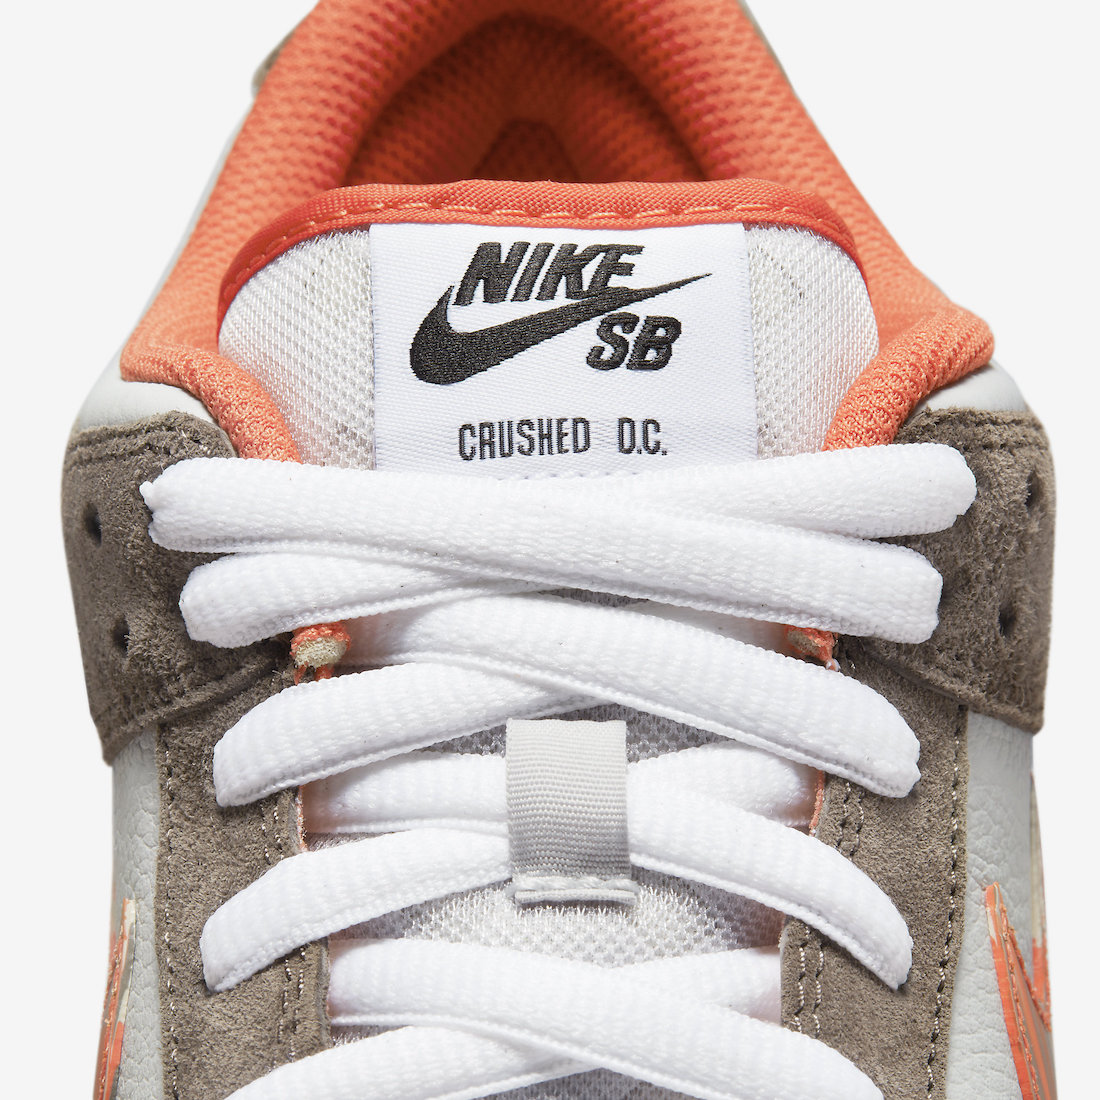 Crushed DC Nike SB Dunk Low DH7782-001 Release Date